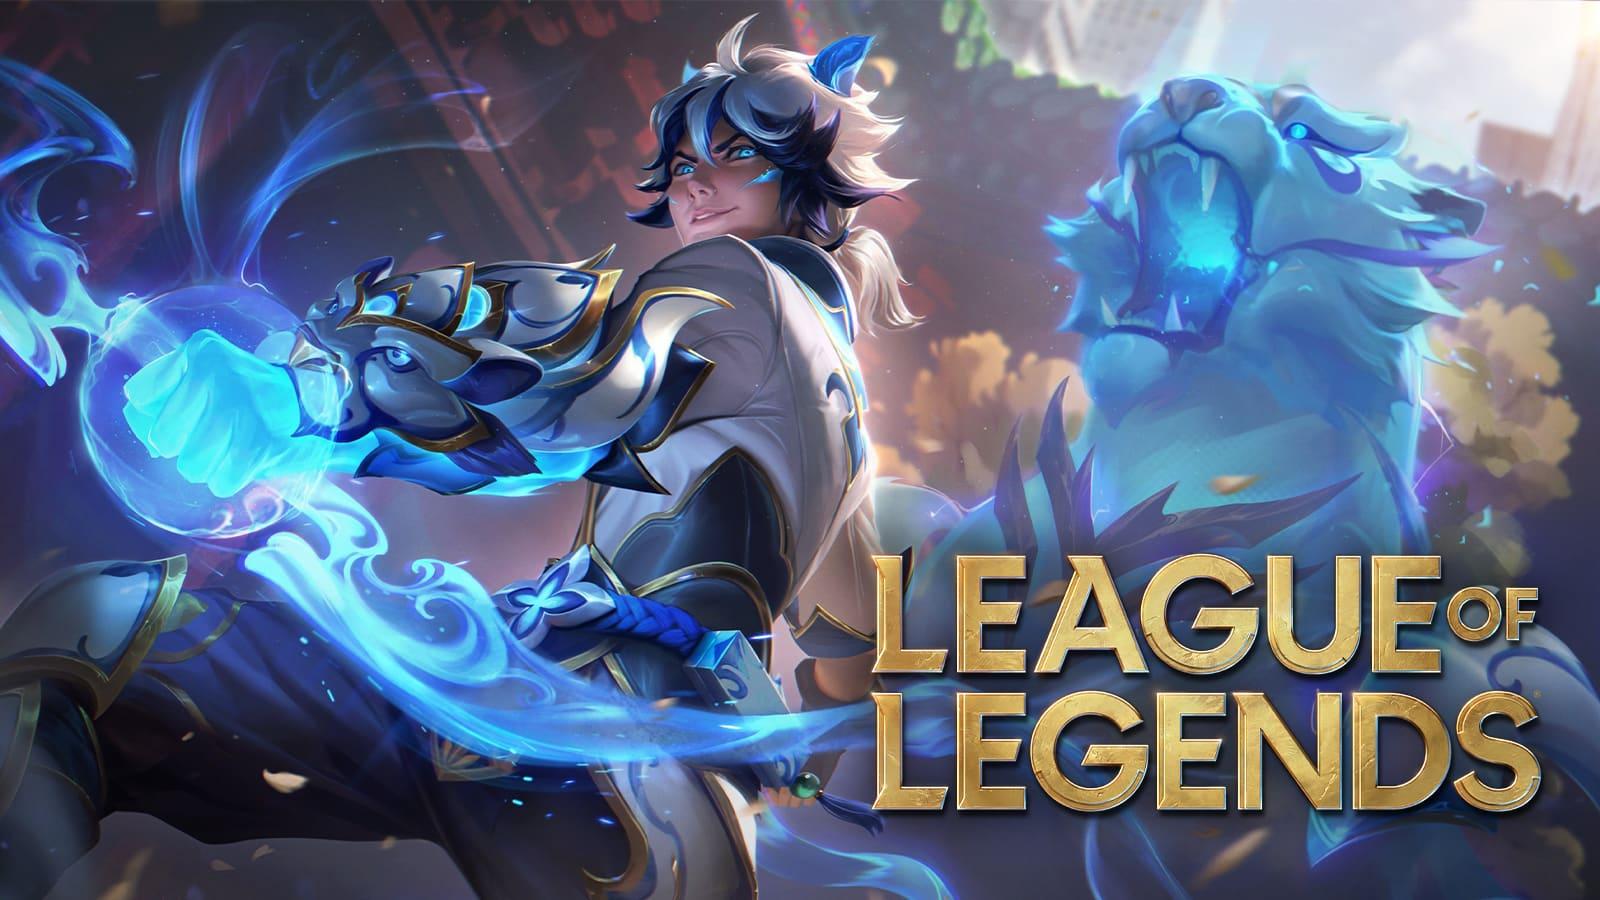 League of Legends' Prime Gaming February 2022 details